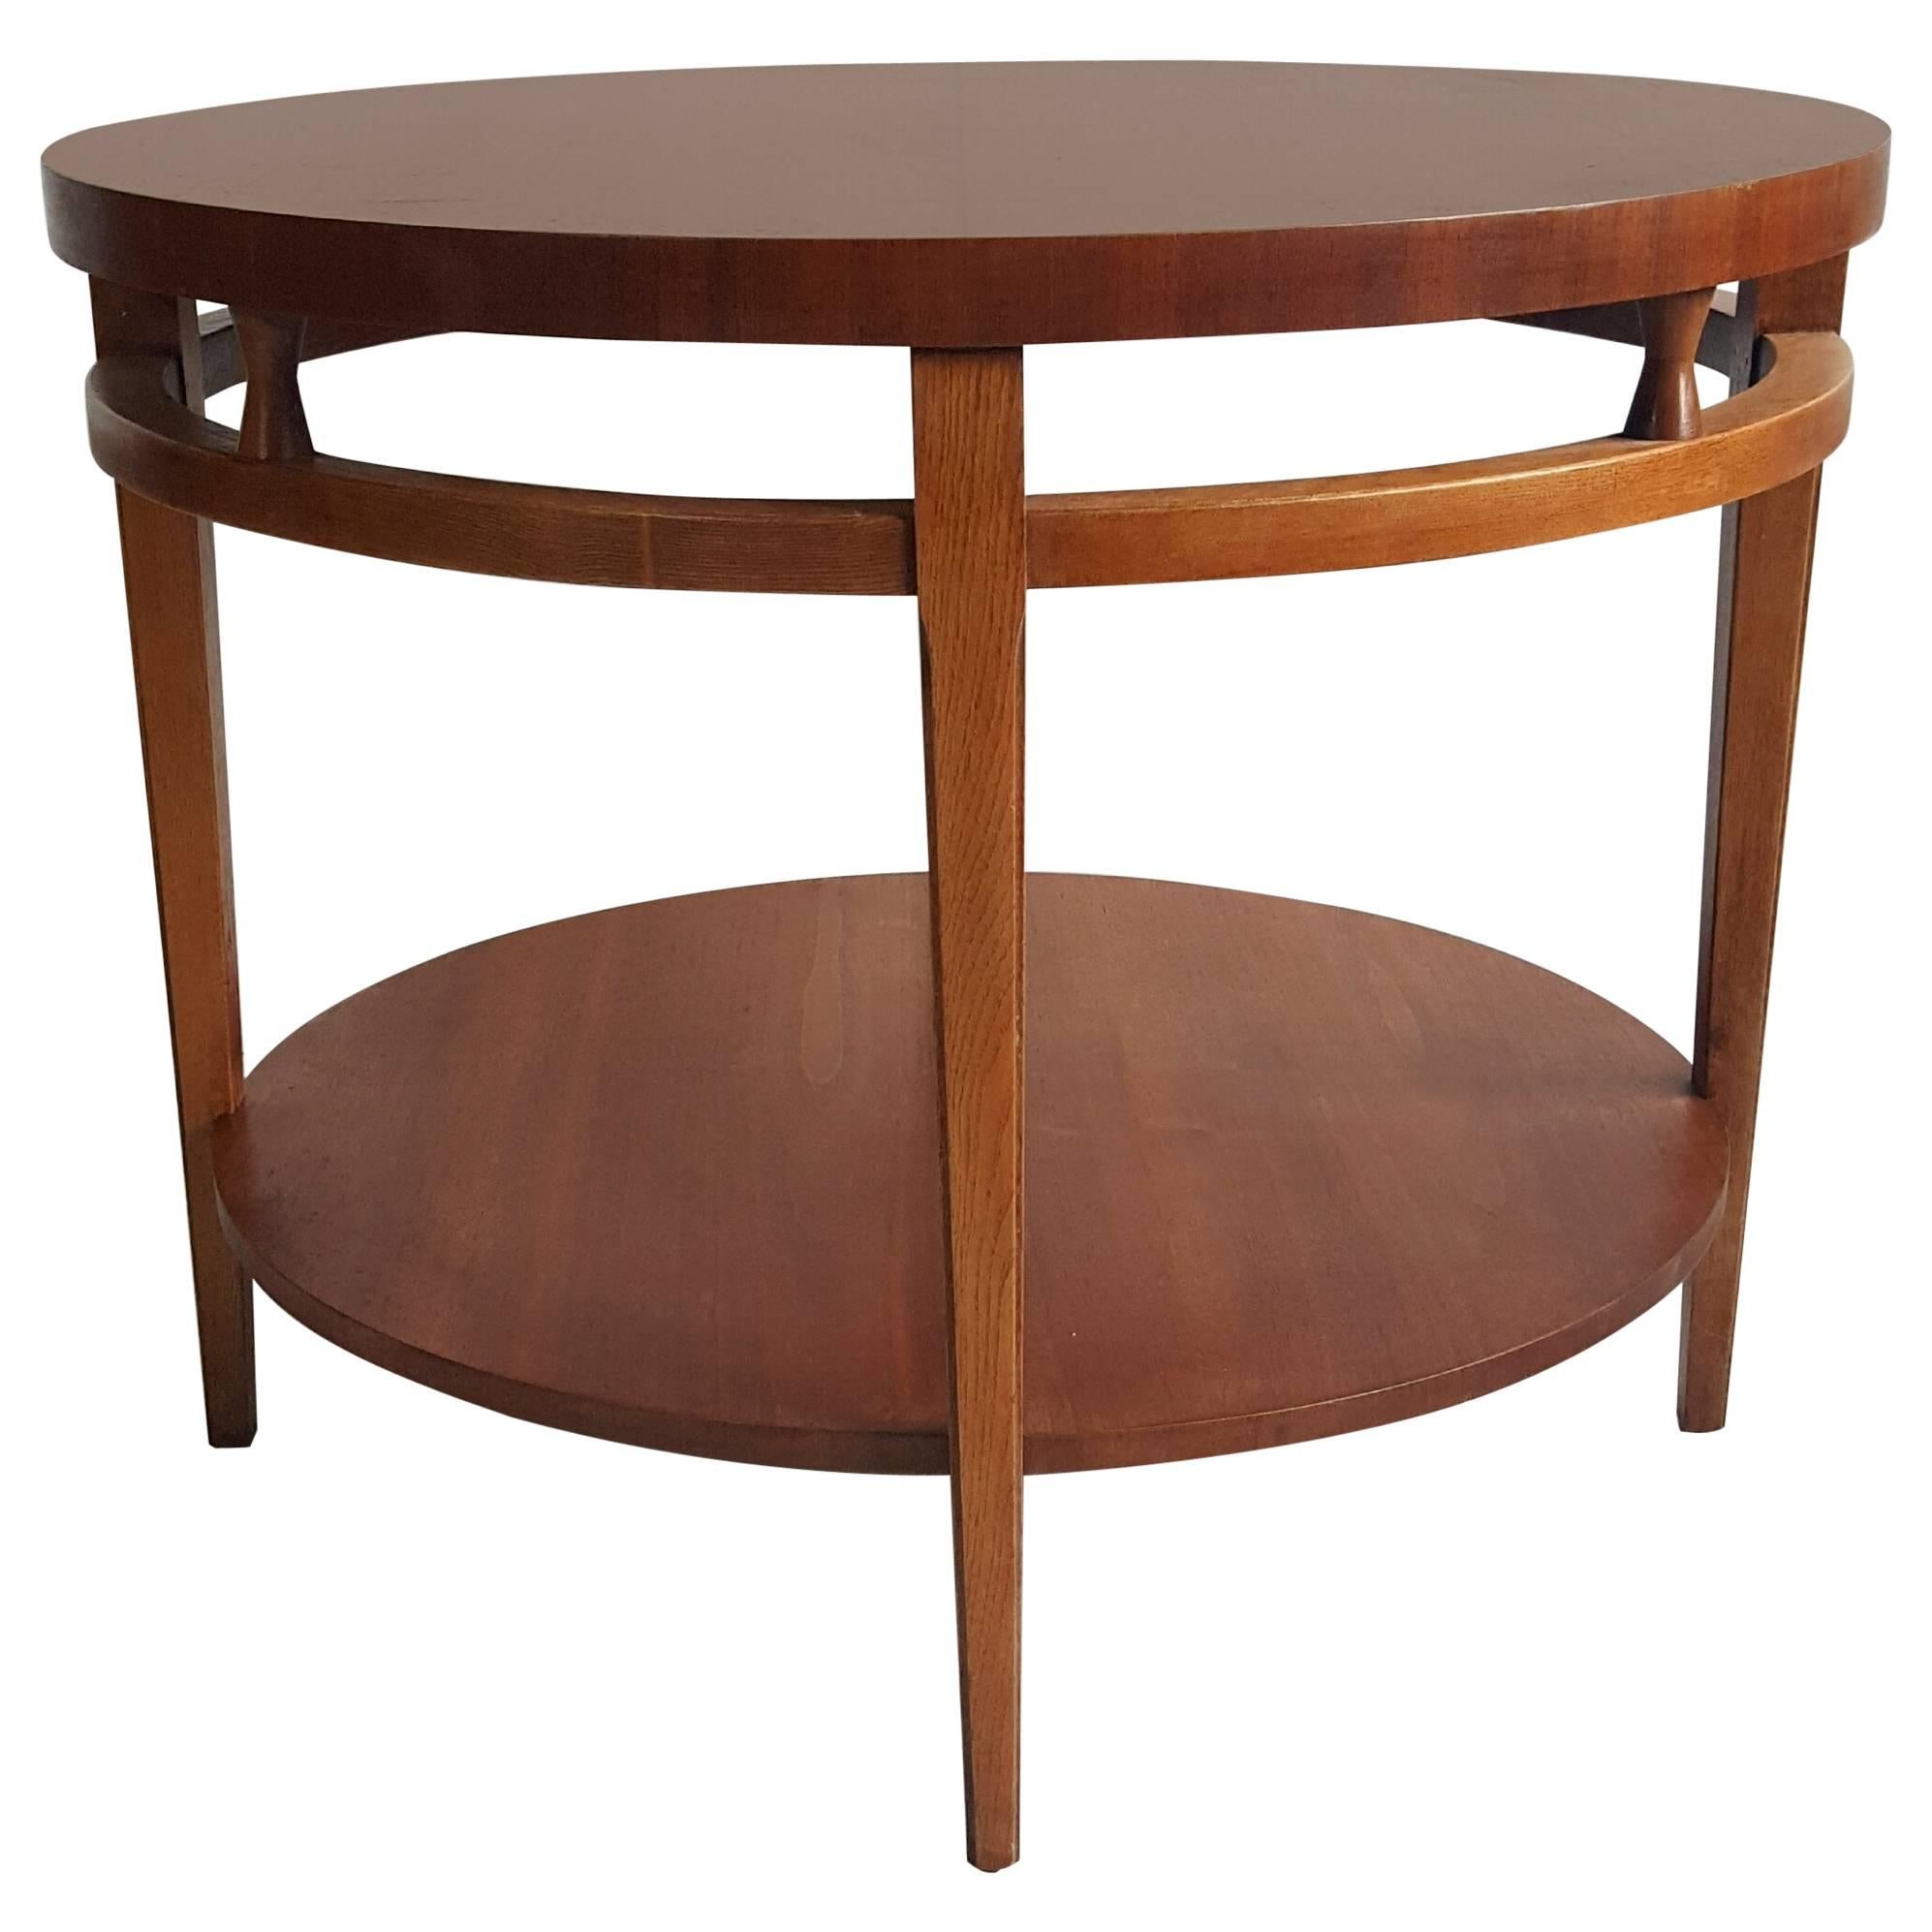 Modernist Walnut and Rosewood Lamp Table 'Tuxedo" by Lane For Sale